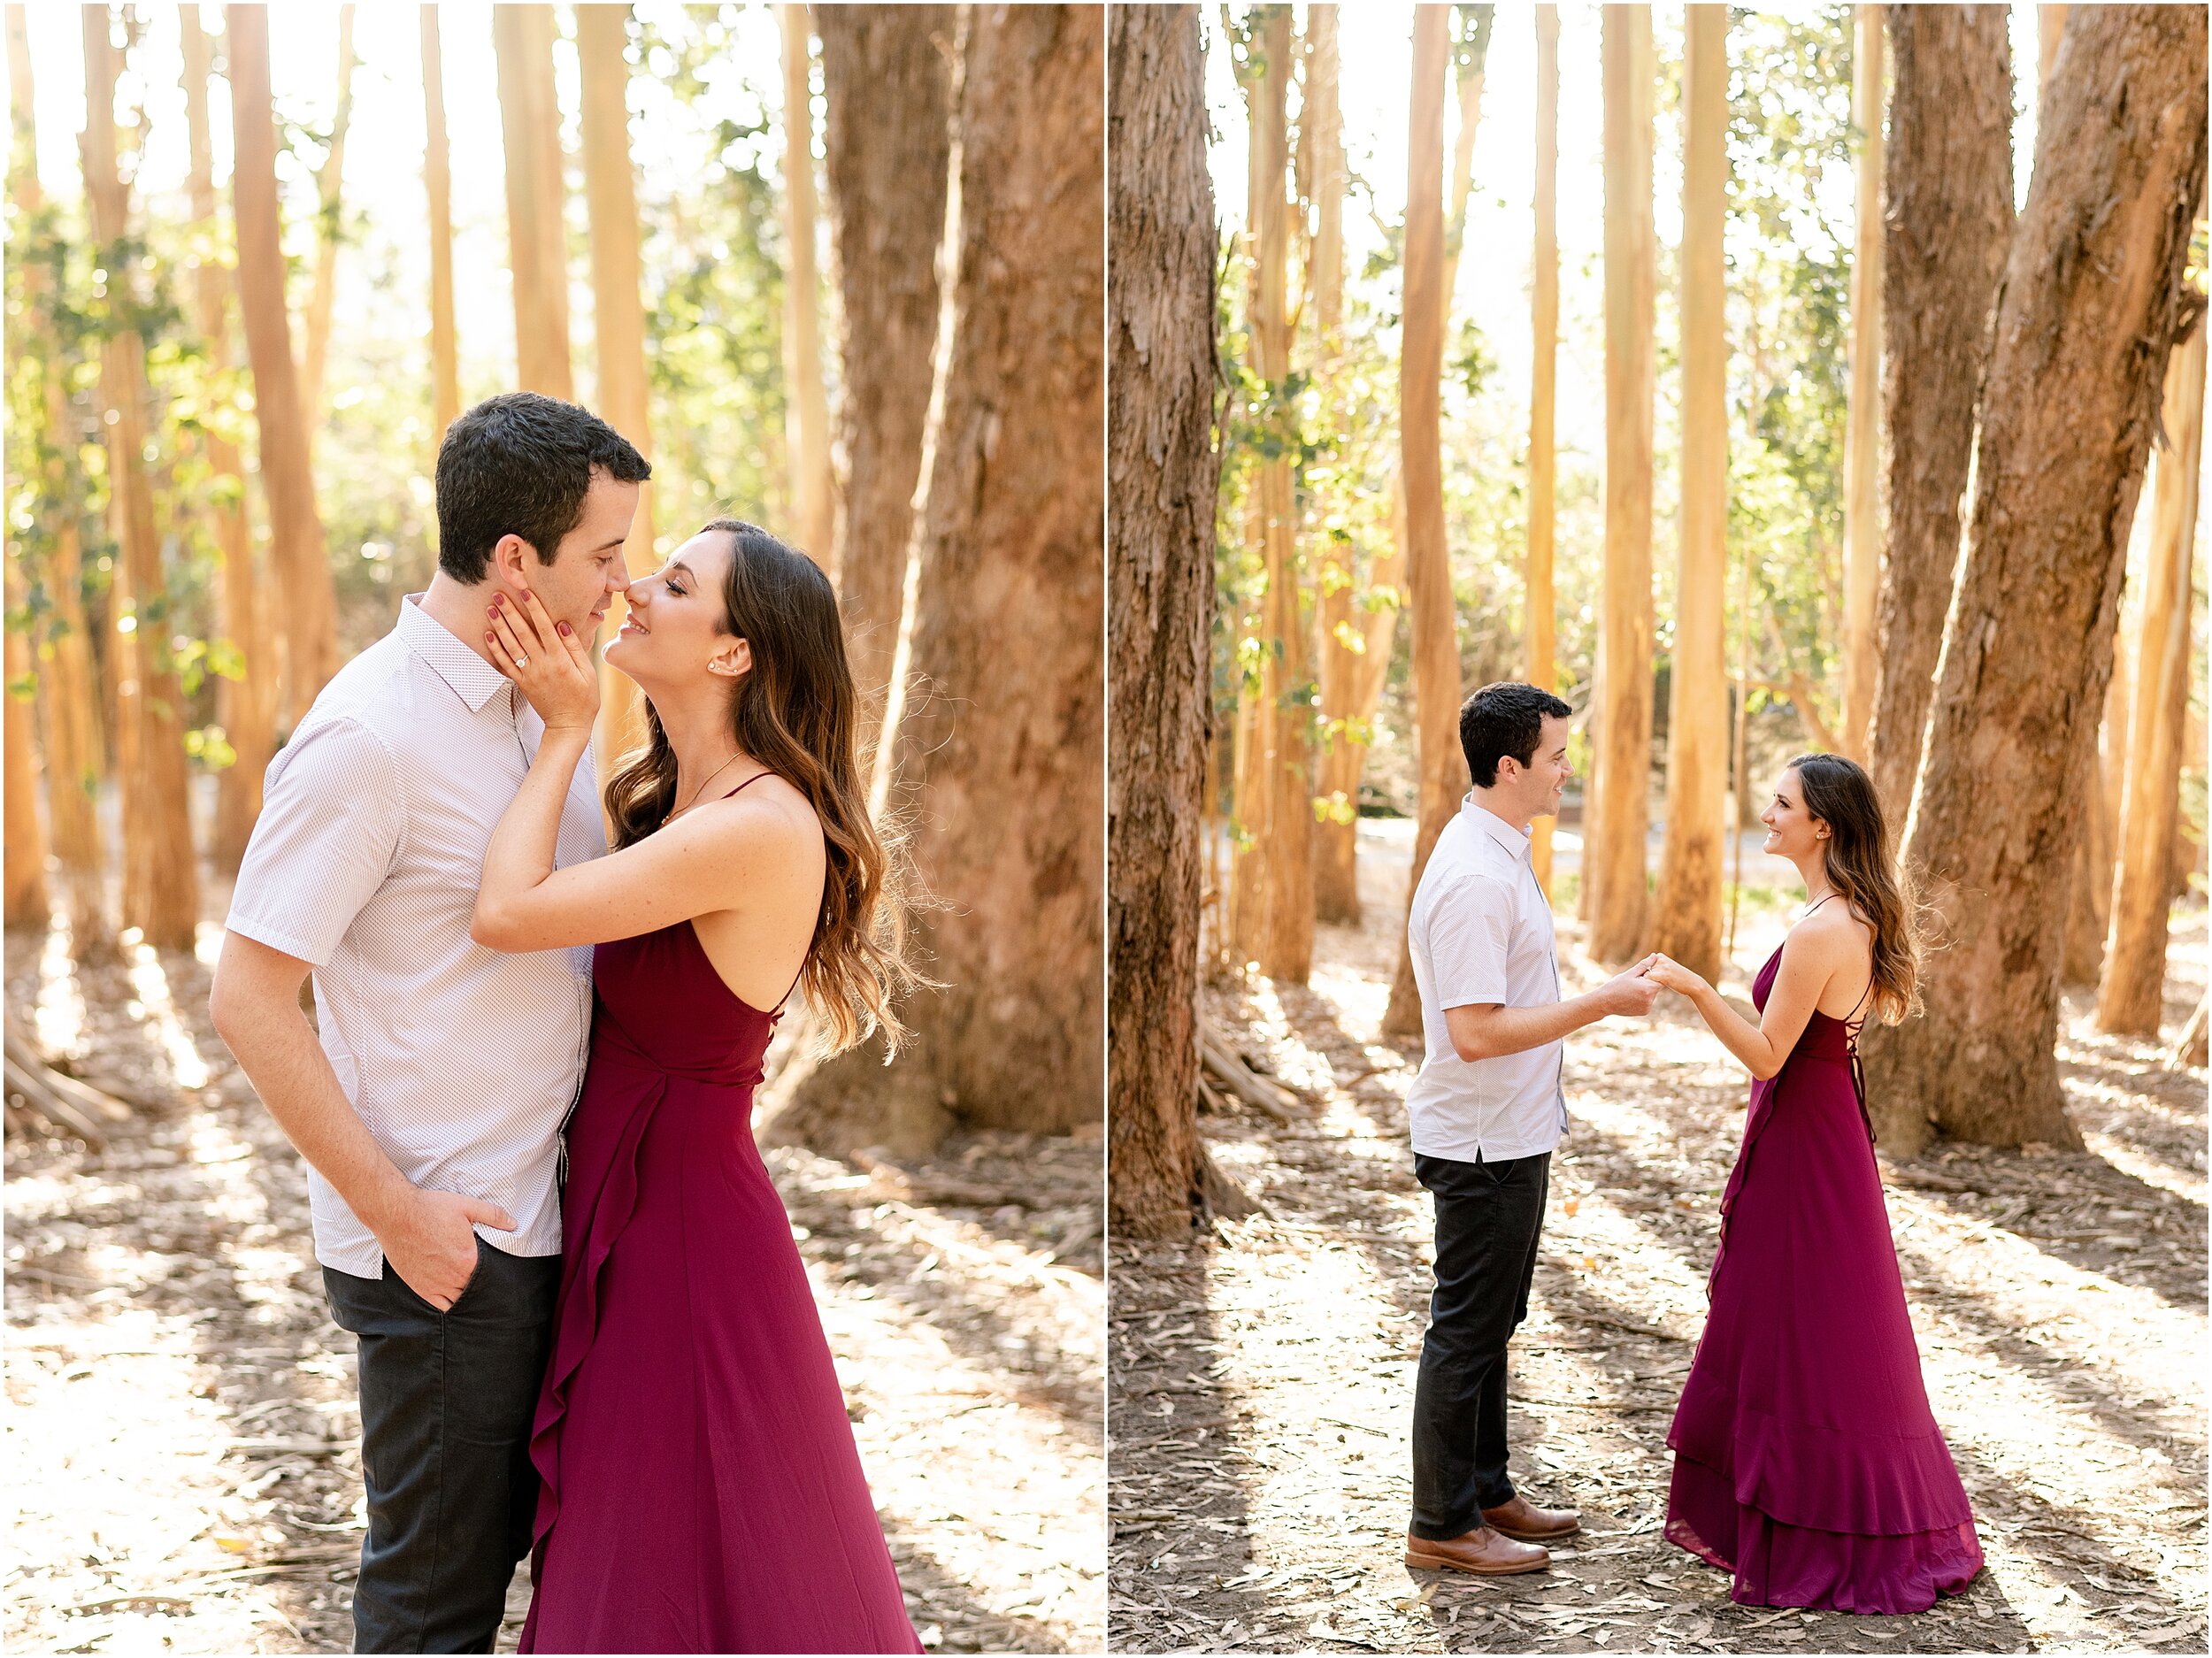 hannah leigh photography Baker Beach, Lovers Lane. Palace of Fine Arts Engagement Session San Franscico, CA_4819.jpg